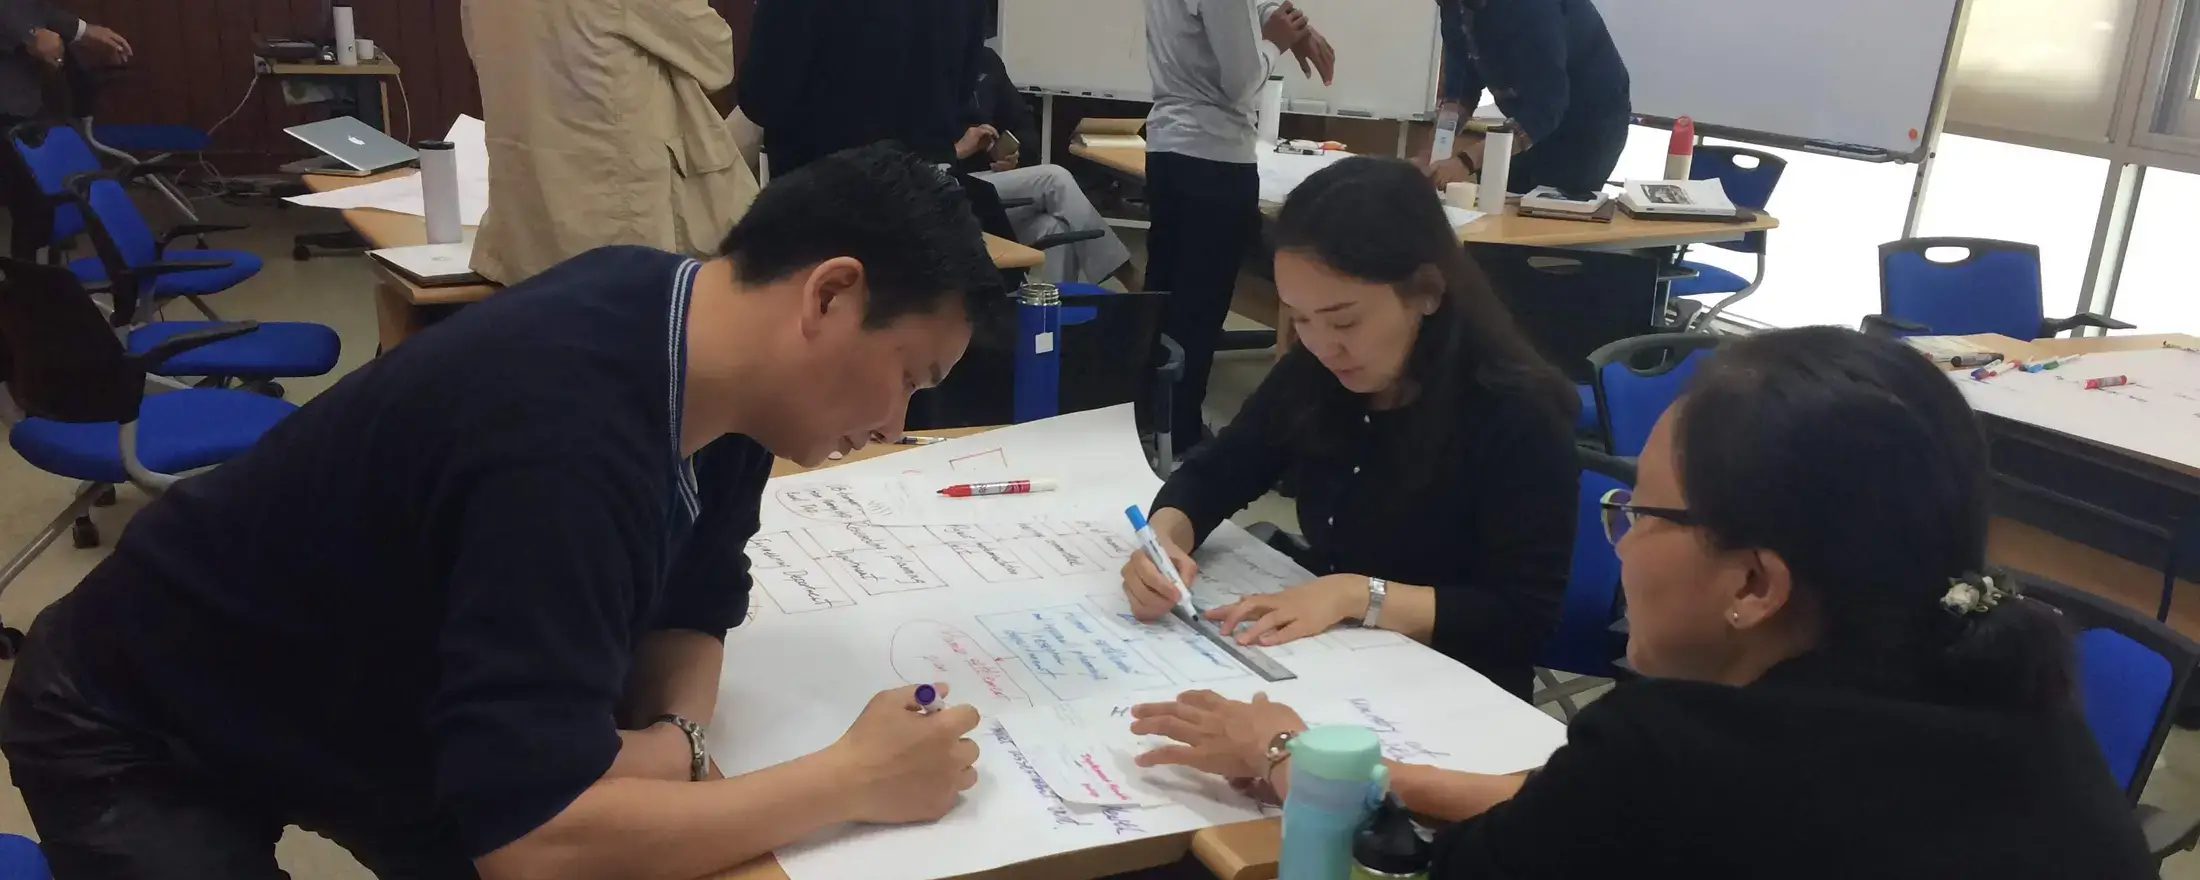 Mongolian participants working on their Stakeholder Analysis exercises